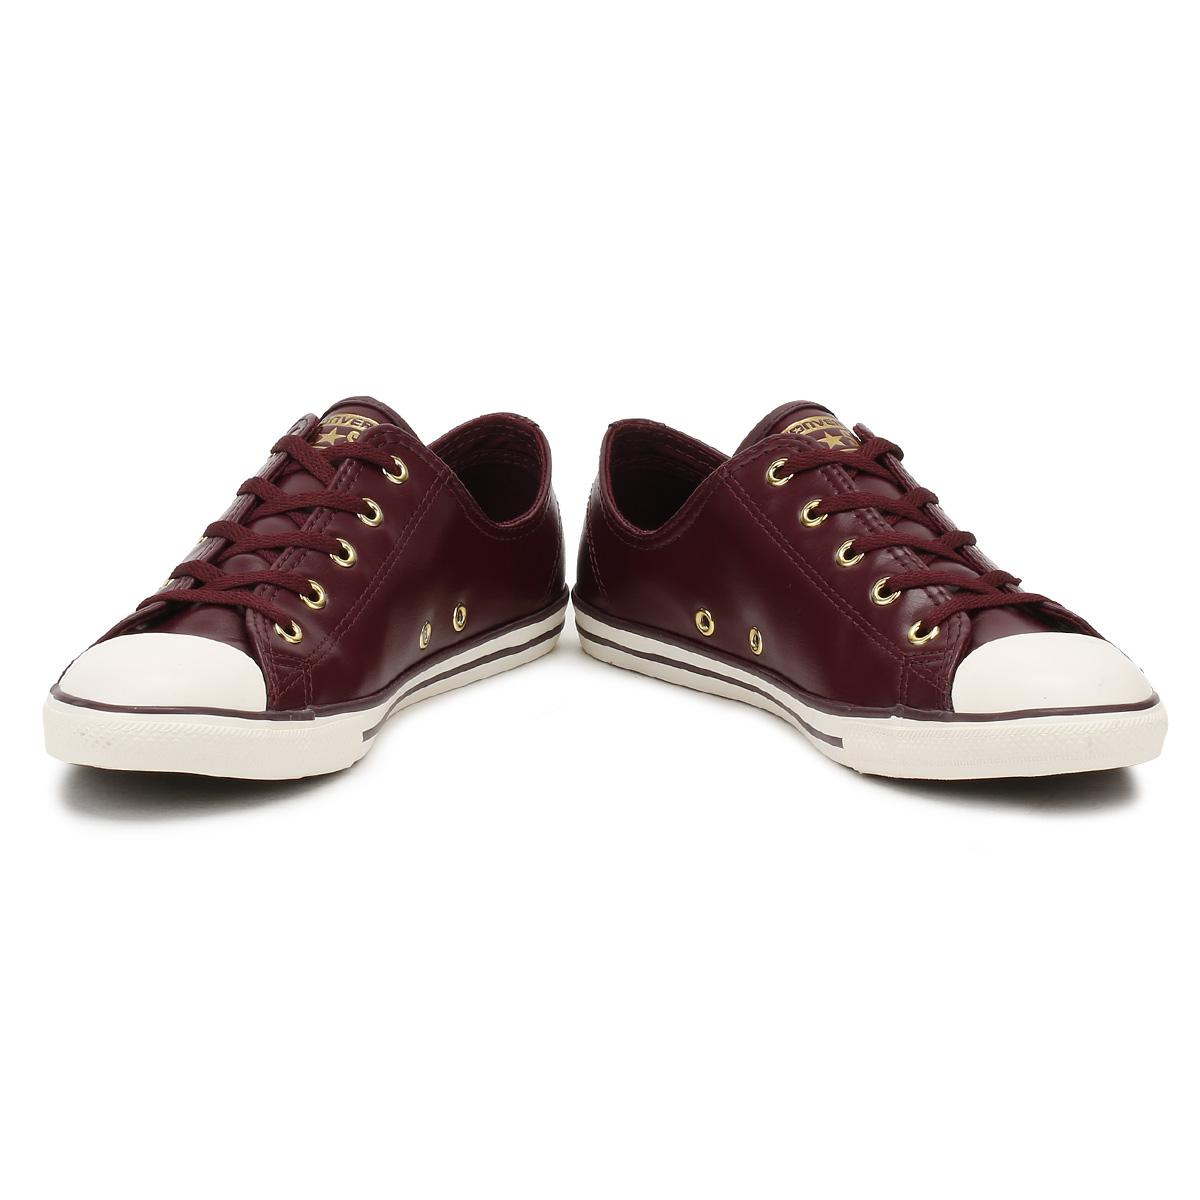 burgundy leather converse womens